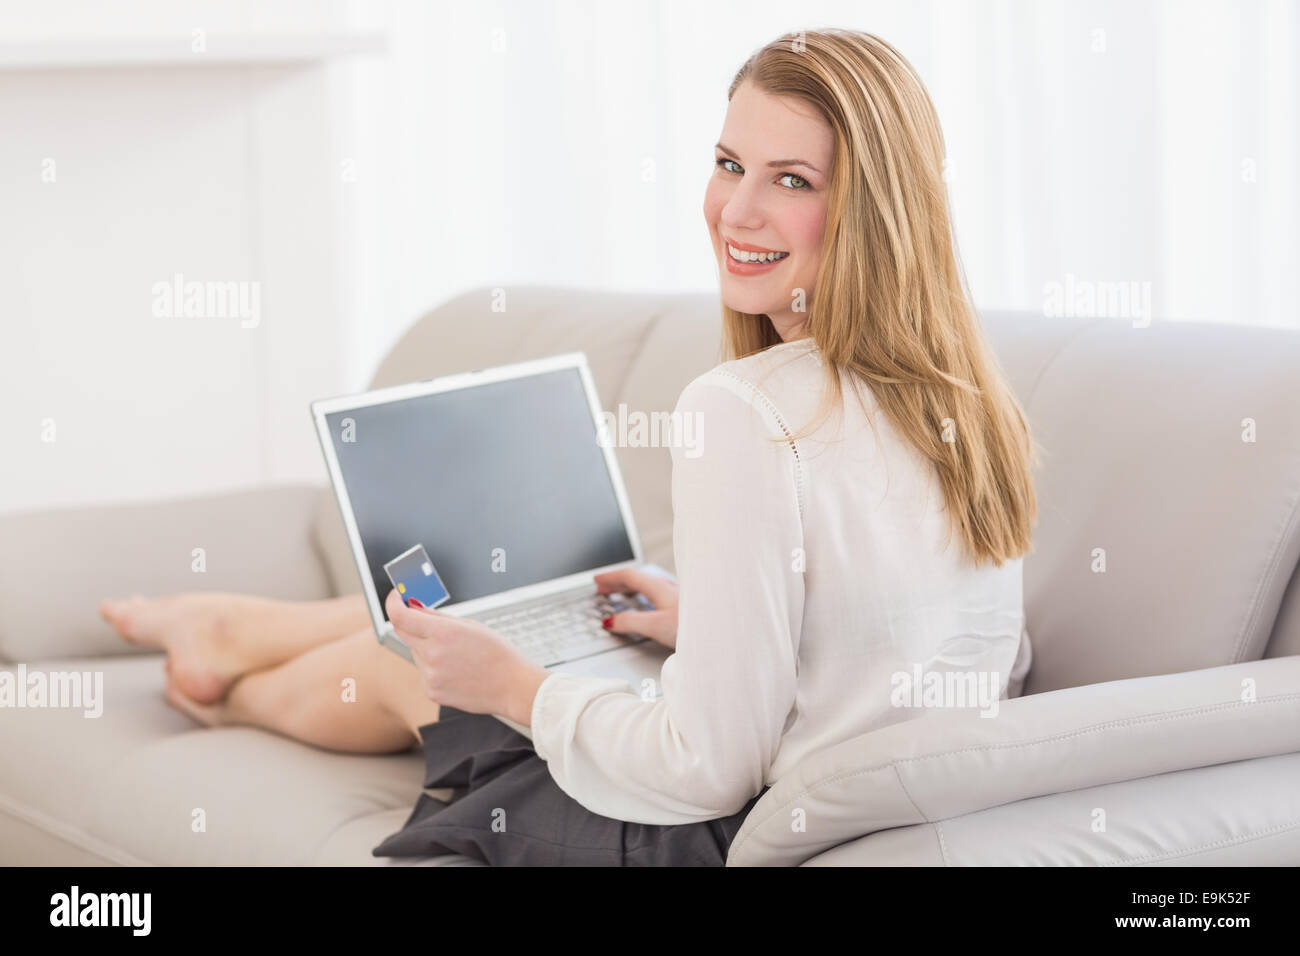 Pretty blonde looking over shoulder while shopping online Stock Photo